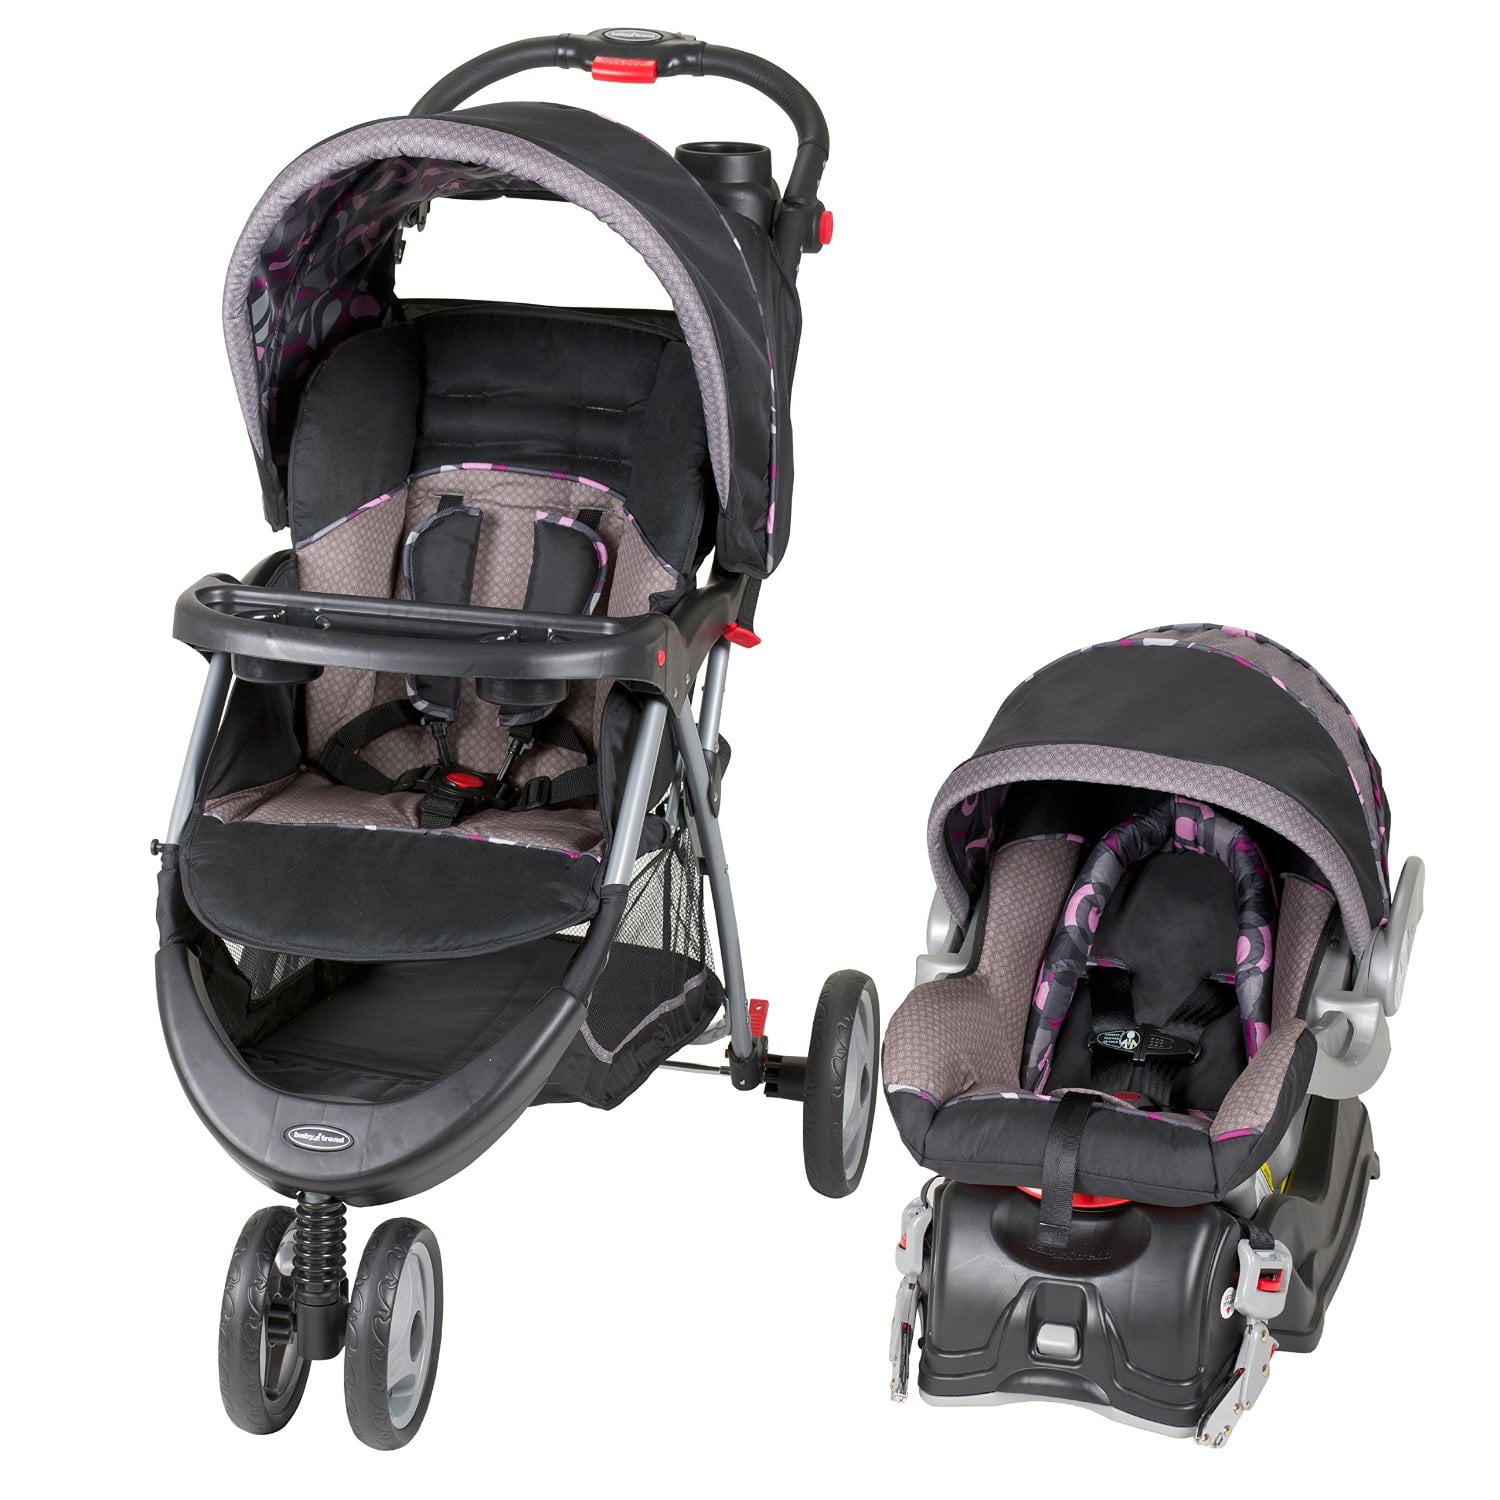 easy ride 5 travel system